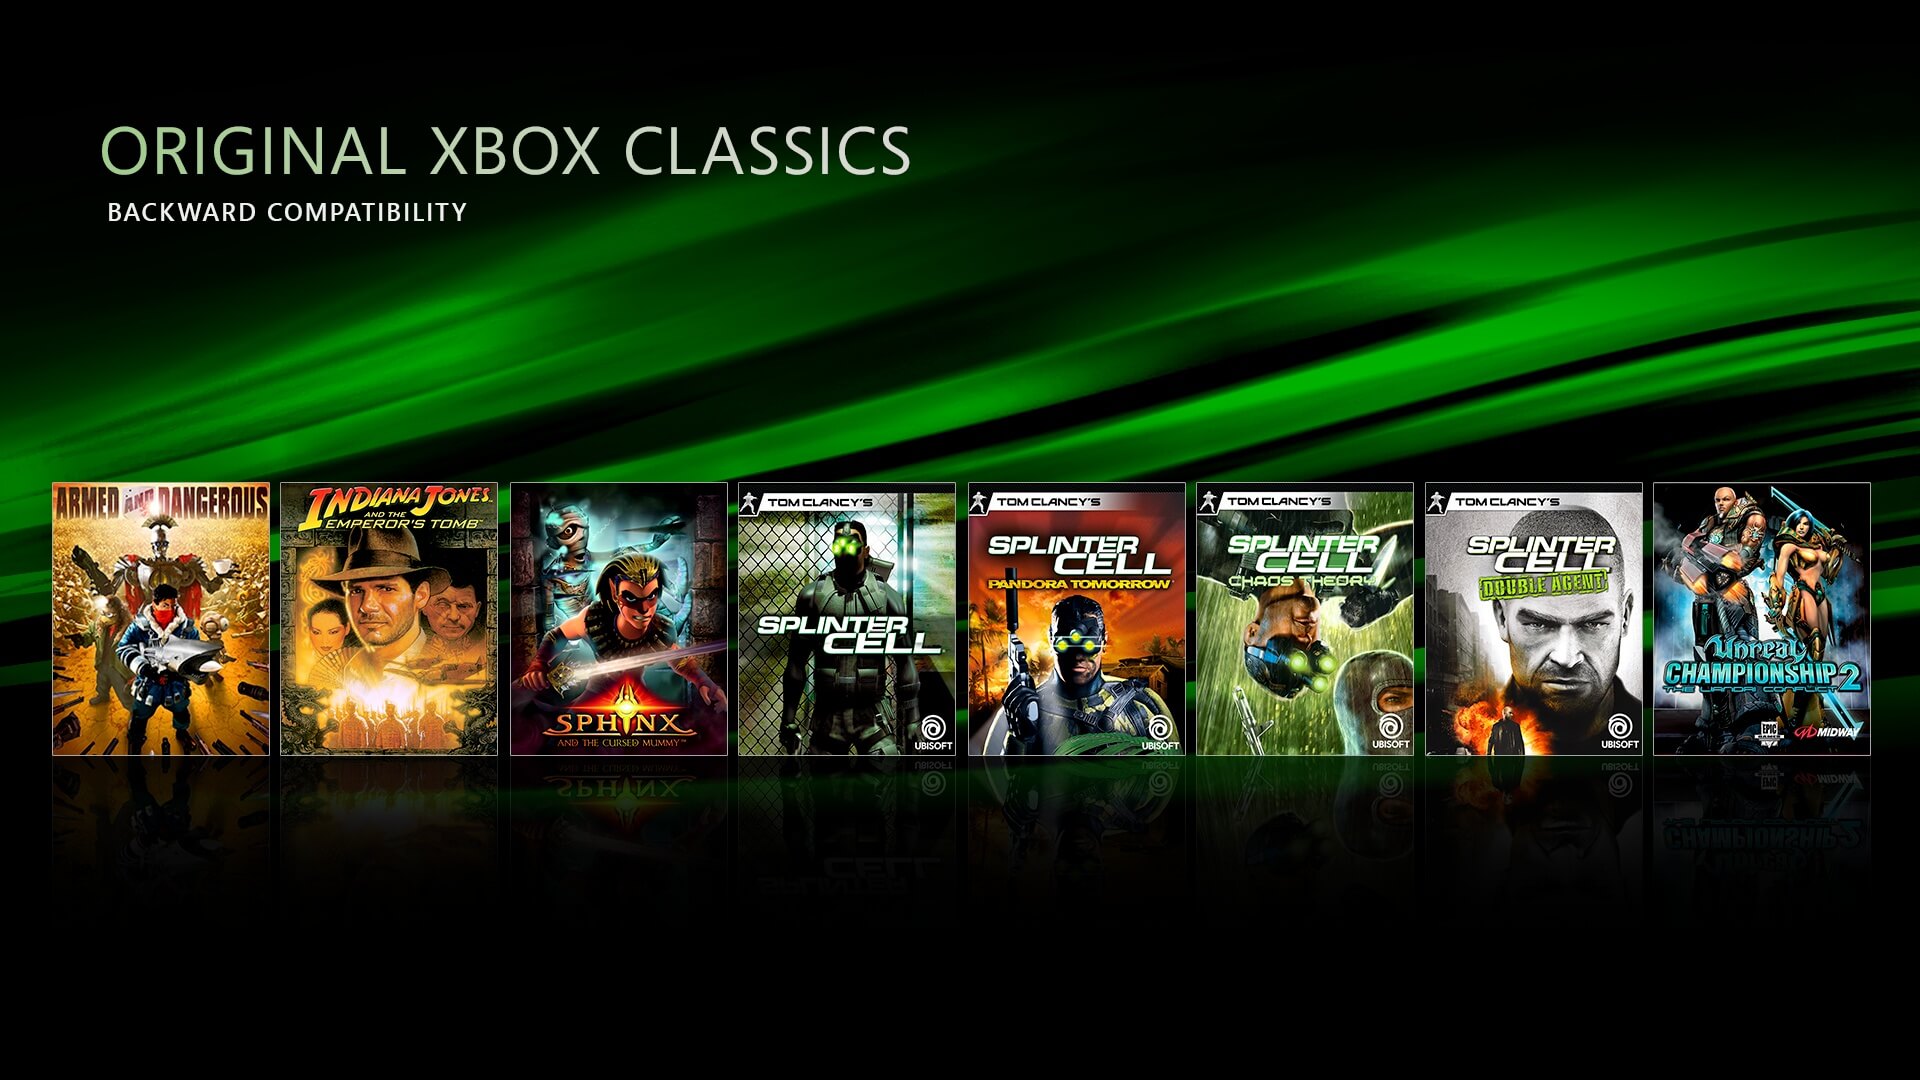 Microsoft adds last batch of games to the Xbox One Backward Compatibility catalog